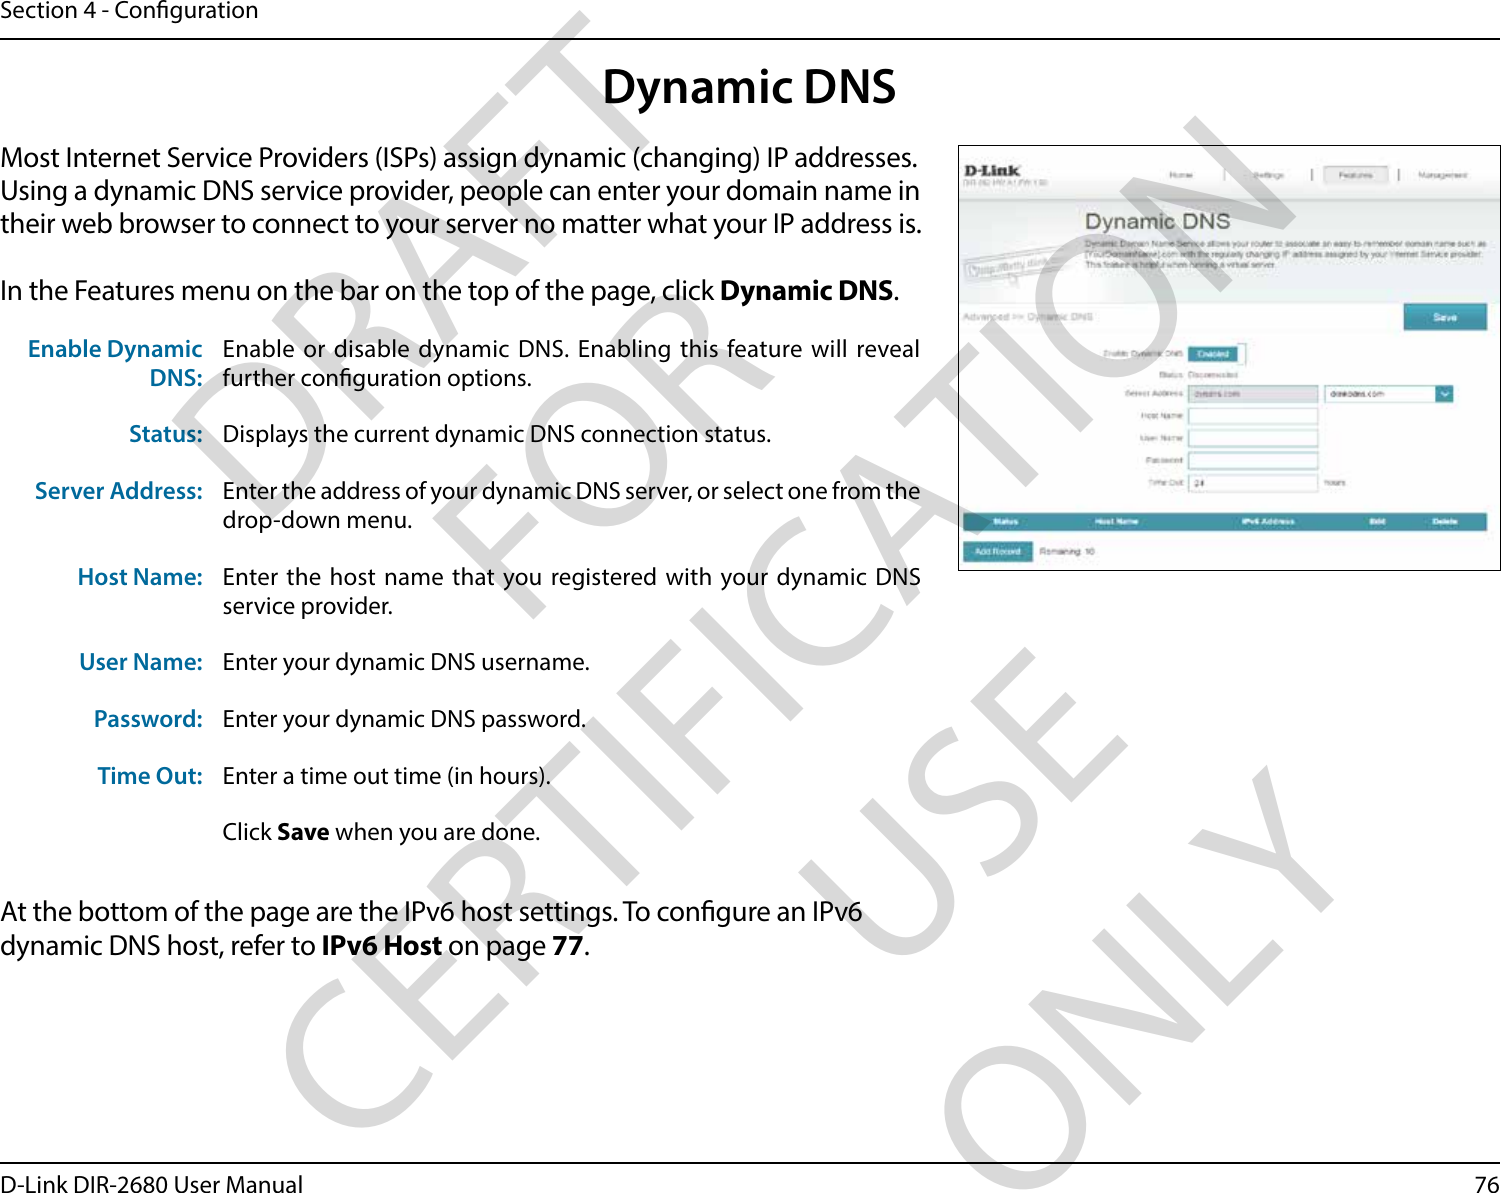 76D-Link DIR-2680 User ManualSection 4 - CongurationDynamic DNSMost Internet Service Providers (ISPs) assign dynamic (changing) IP addresses. Using a dynamic DNS service provider, people can enter your domain name in their web browser to connect to your server no matter what your IP address is.In the Features menu on the bar on the top of the page, click Dynamic DNS.At the bottom of the page are the IPv6 host settings. To congure an IPv6 dynamic DNS host, refer to IPv6 Host on page 77.Enable Dynamic DNS:Enable or disable dynamic DNS. Enabling this feature will reveal further conguration options.Status: Displays the current dynamic DNS connection status.Server Address: Enter the address of your dynamic DNS server, or select one from the drop-down menu.Host Name: Enter the host name that you registered with your dynamic DNS service provider.User Name: Enter your dynamic DNS username.Password: Enter your dynamic DNS password.Time Out: Enter a time out time (in hours).Click Save when you are done.DRAFT FOR CERTIFICATION USE ONLY